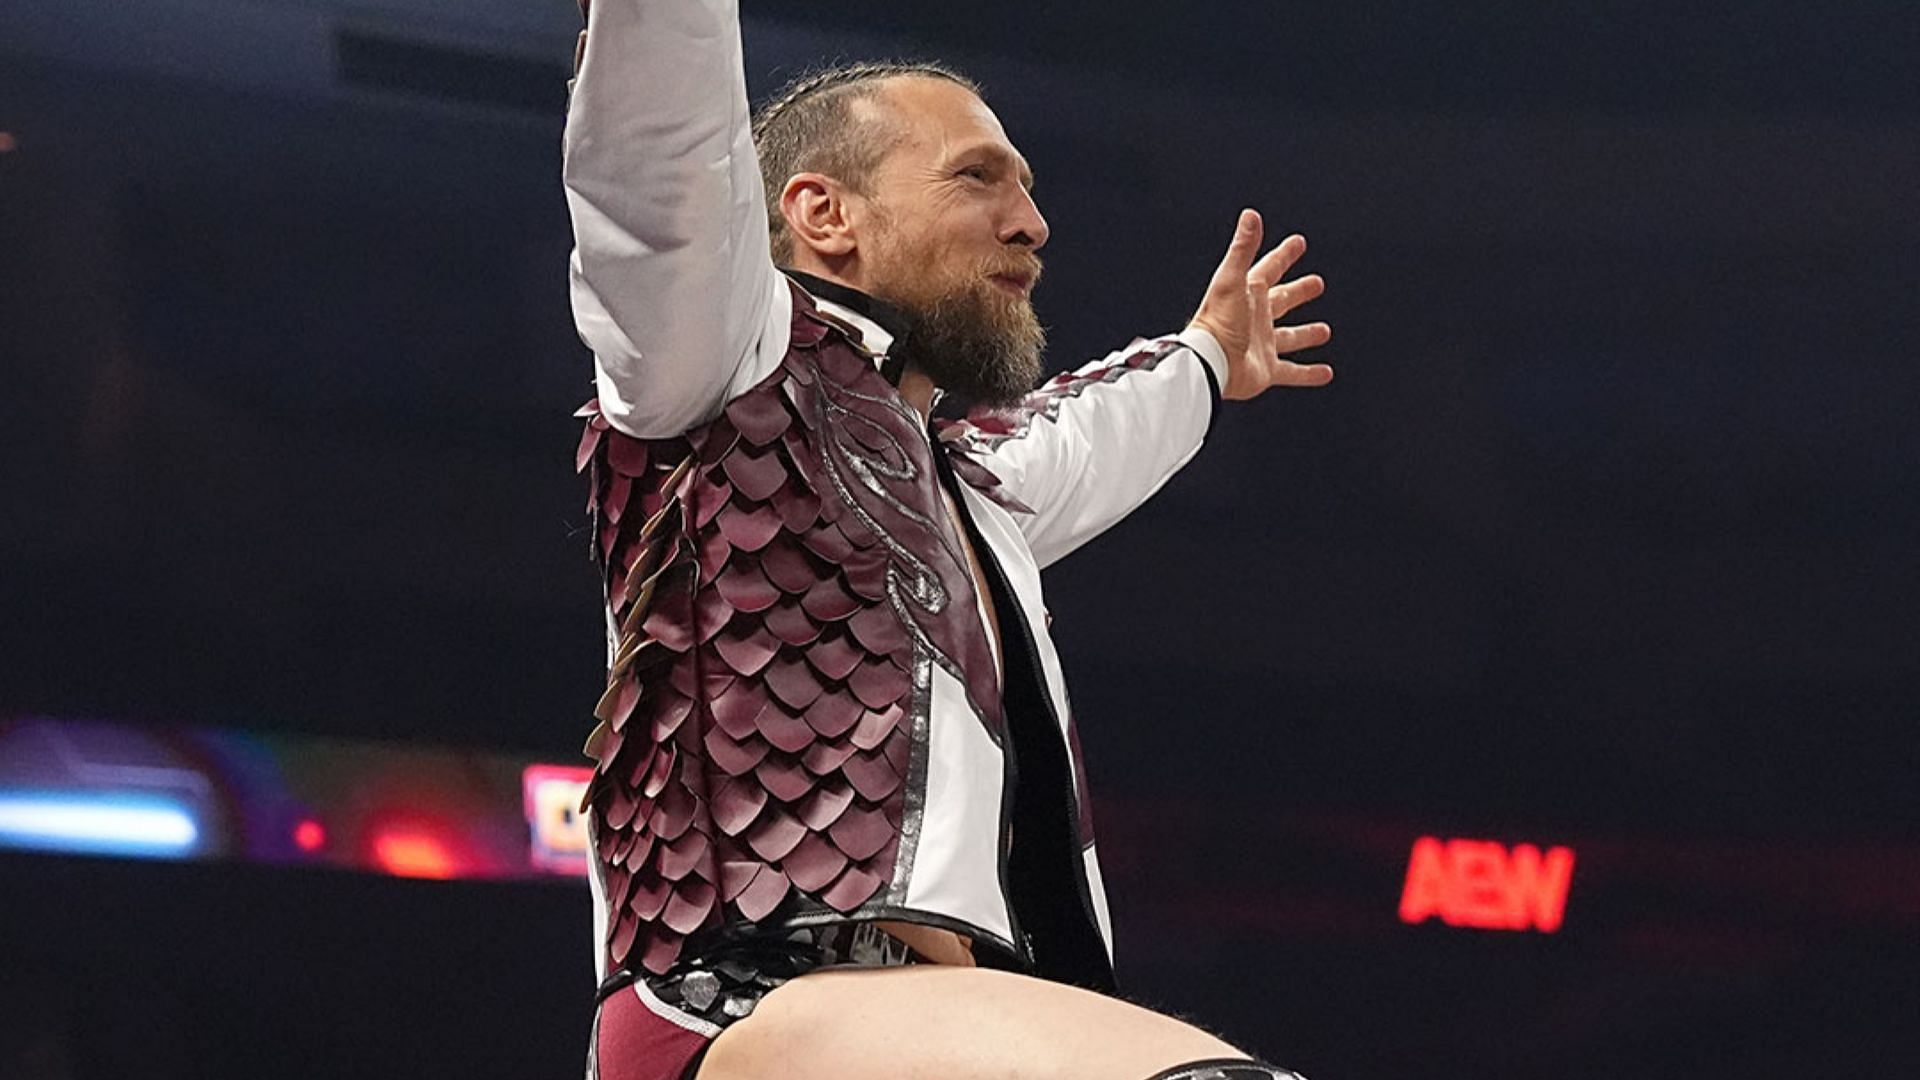 Bryan Danielson makes his entrance on AEW Collision